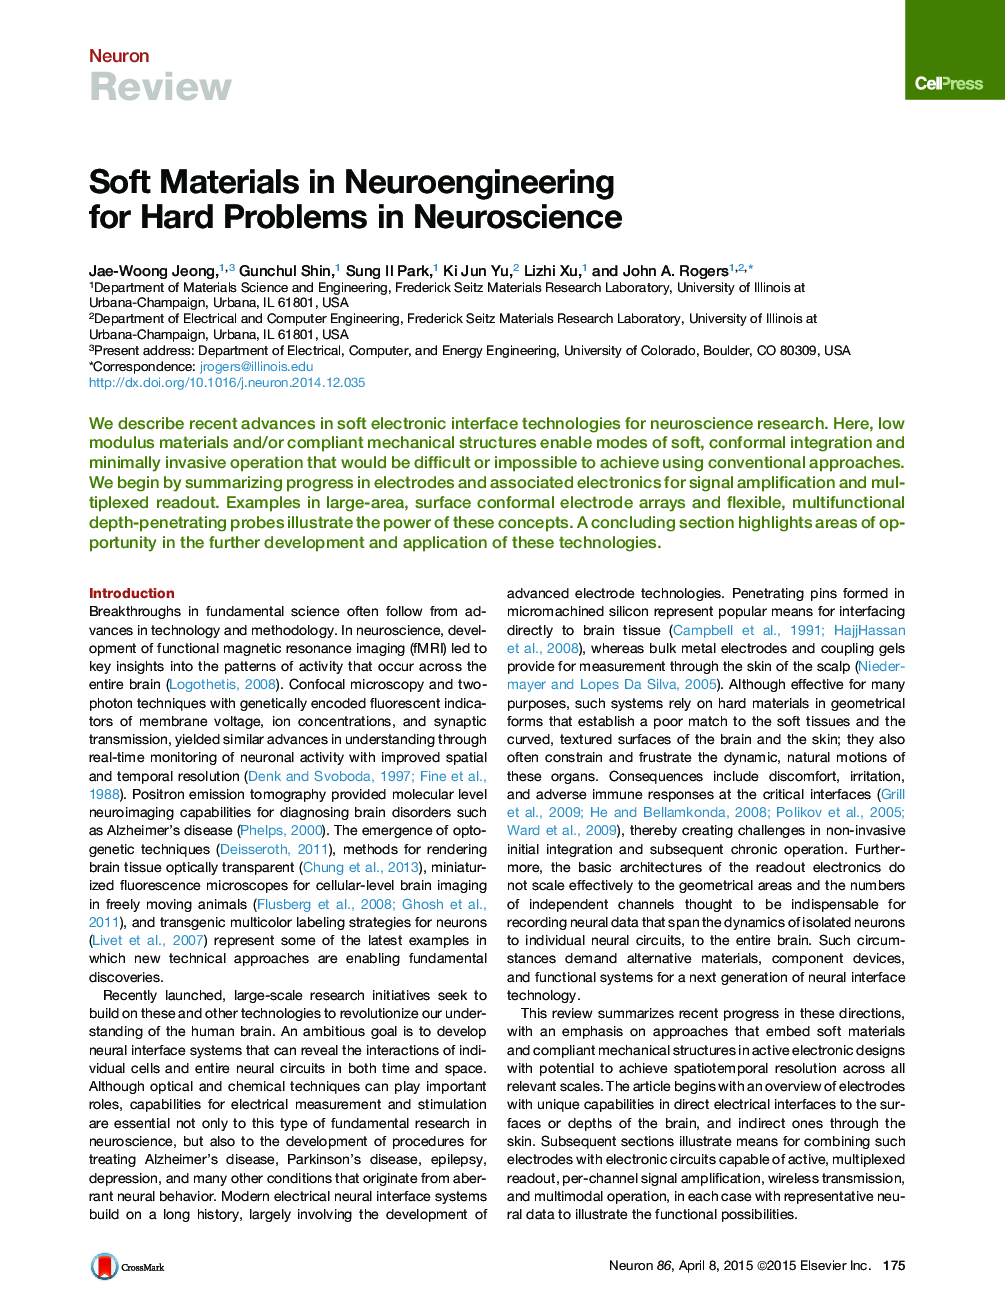 Soft Materials in Neuroengineering for Hard Problems in Neuroscience